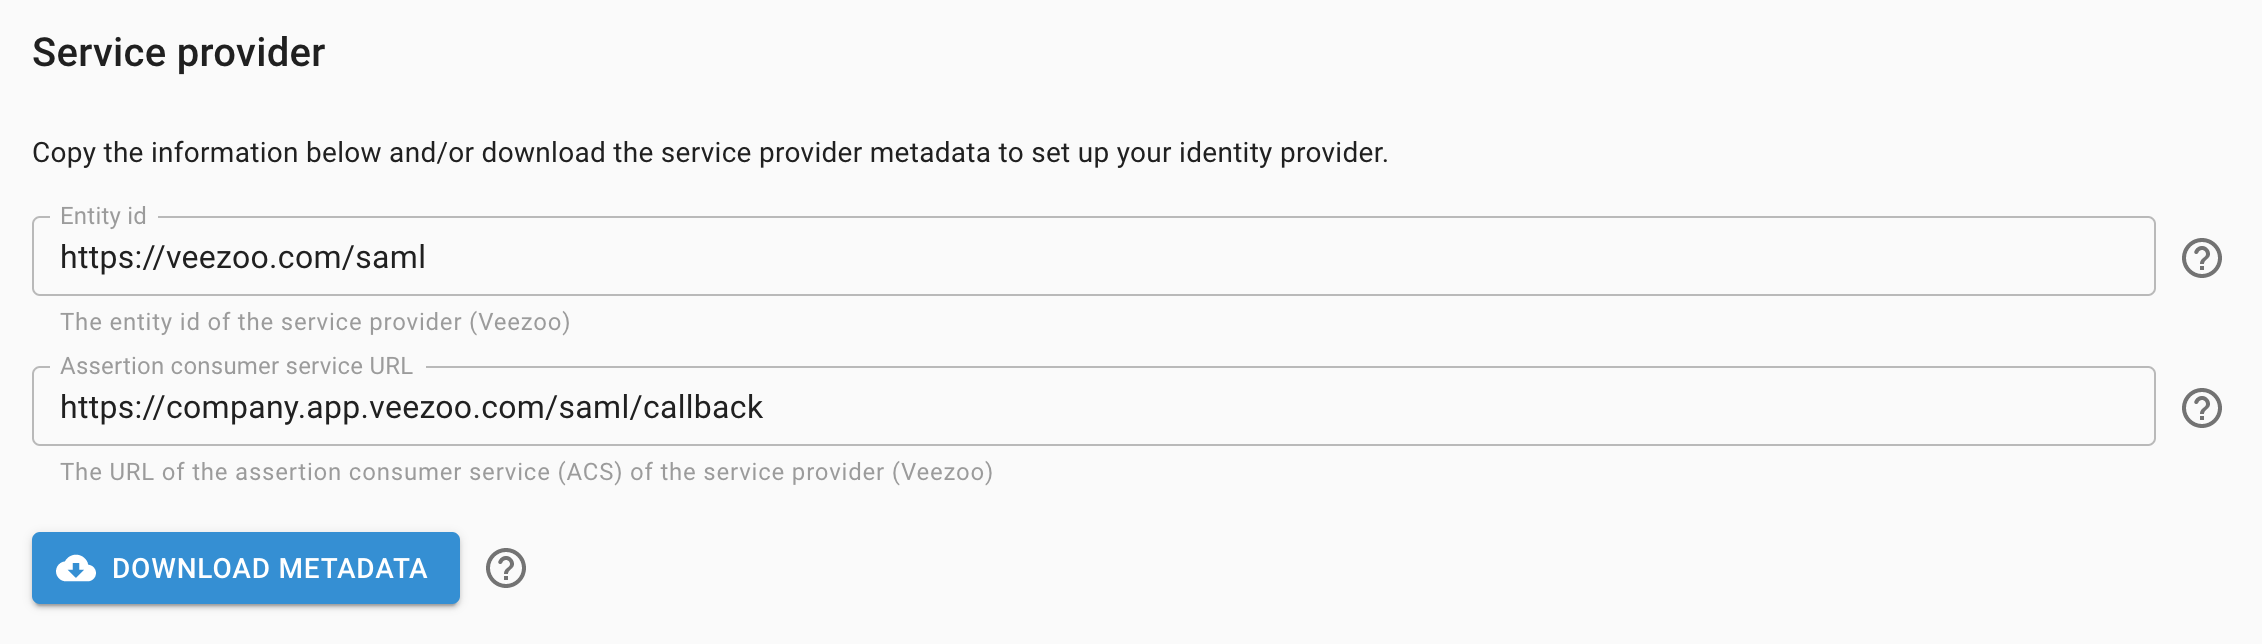 Service provider subsection